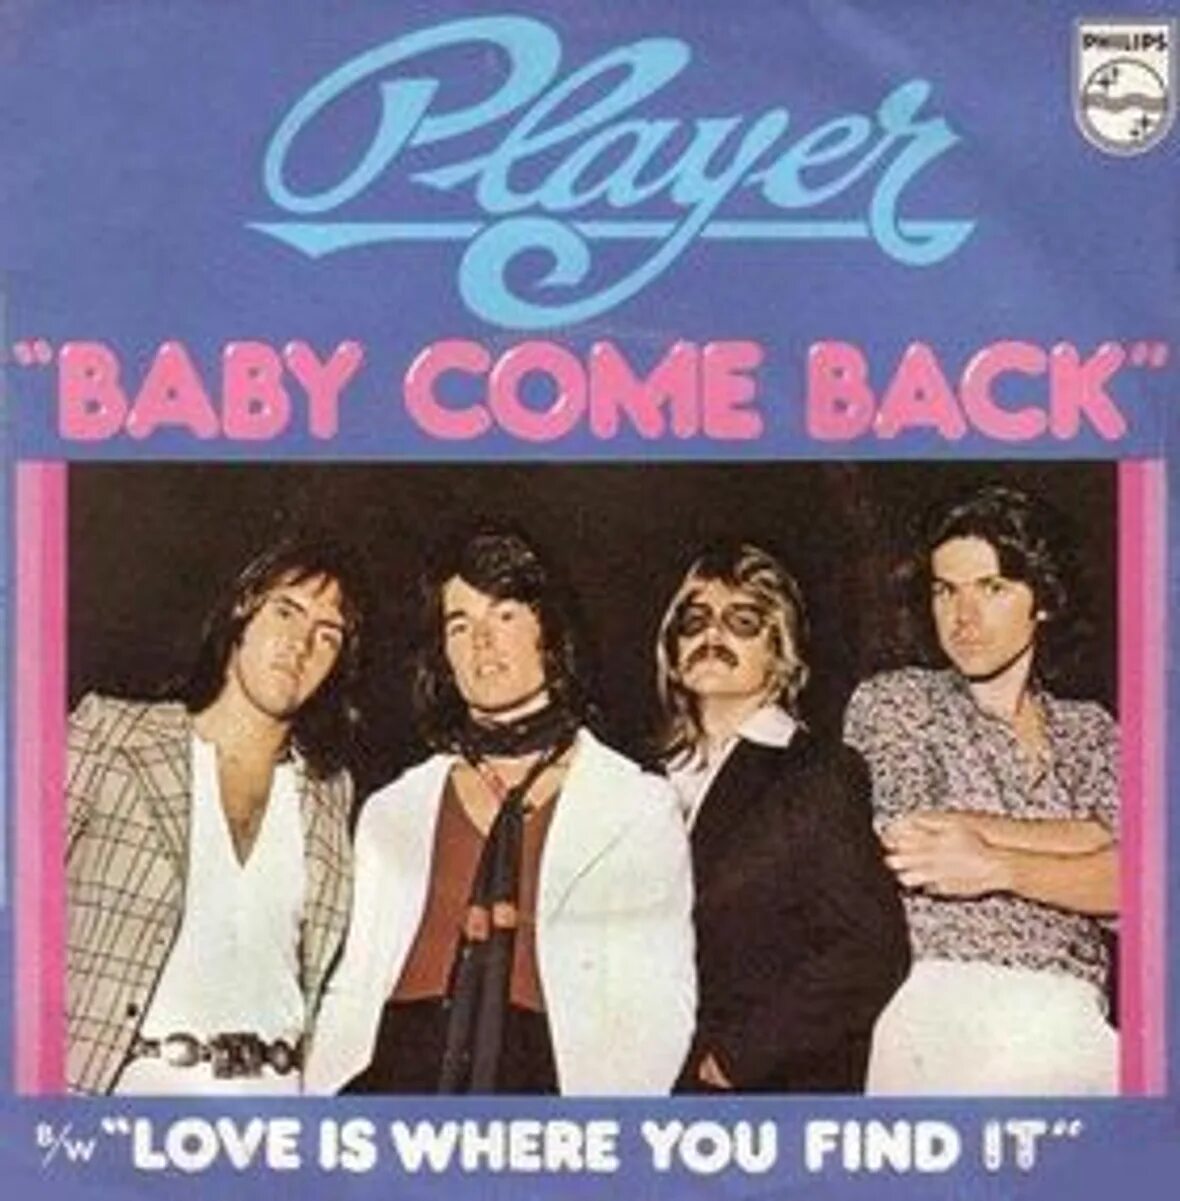 Player Baby come back. Player Baby come back 1977. Baby come back (Player Song). Player Player 1977. Love come baby